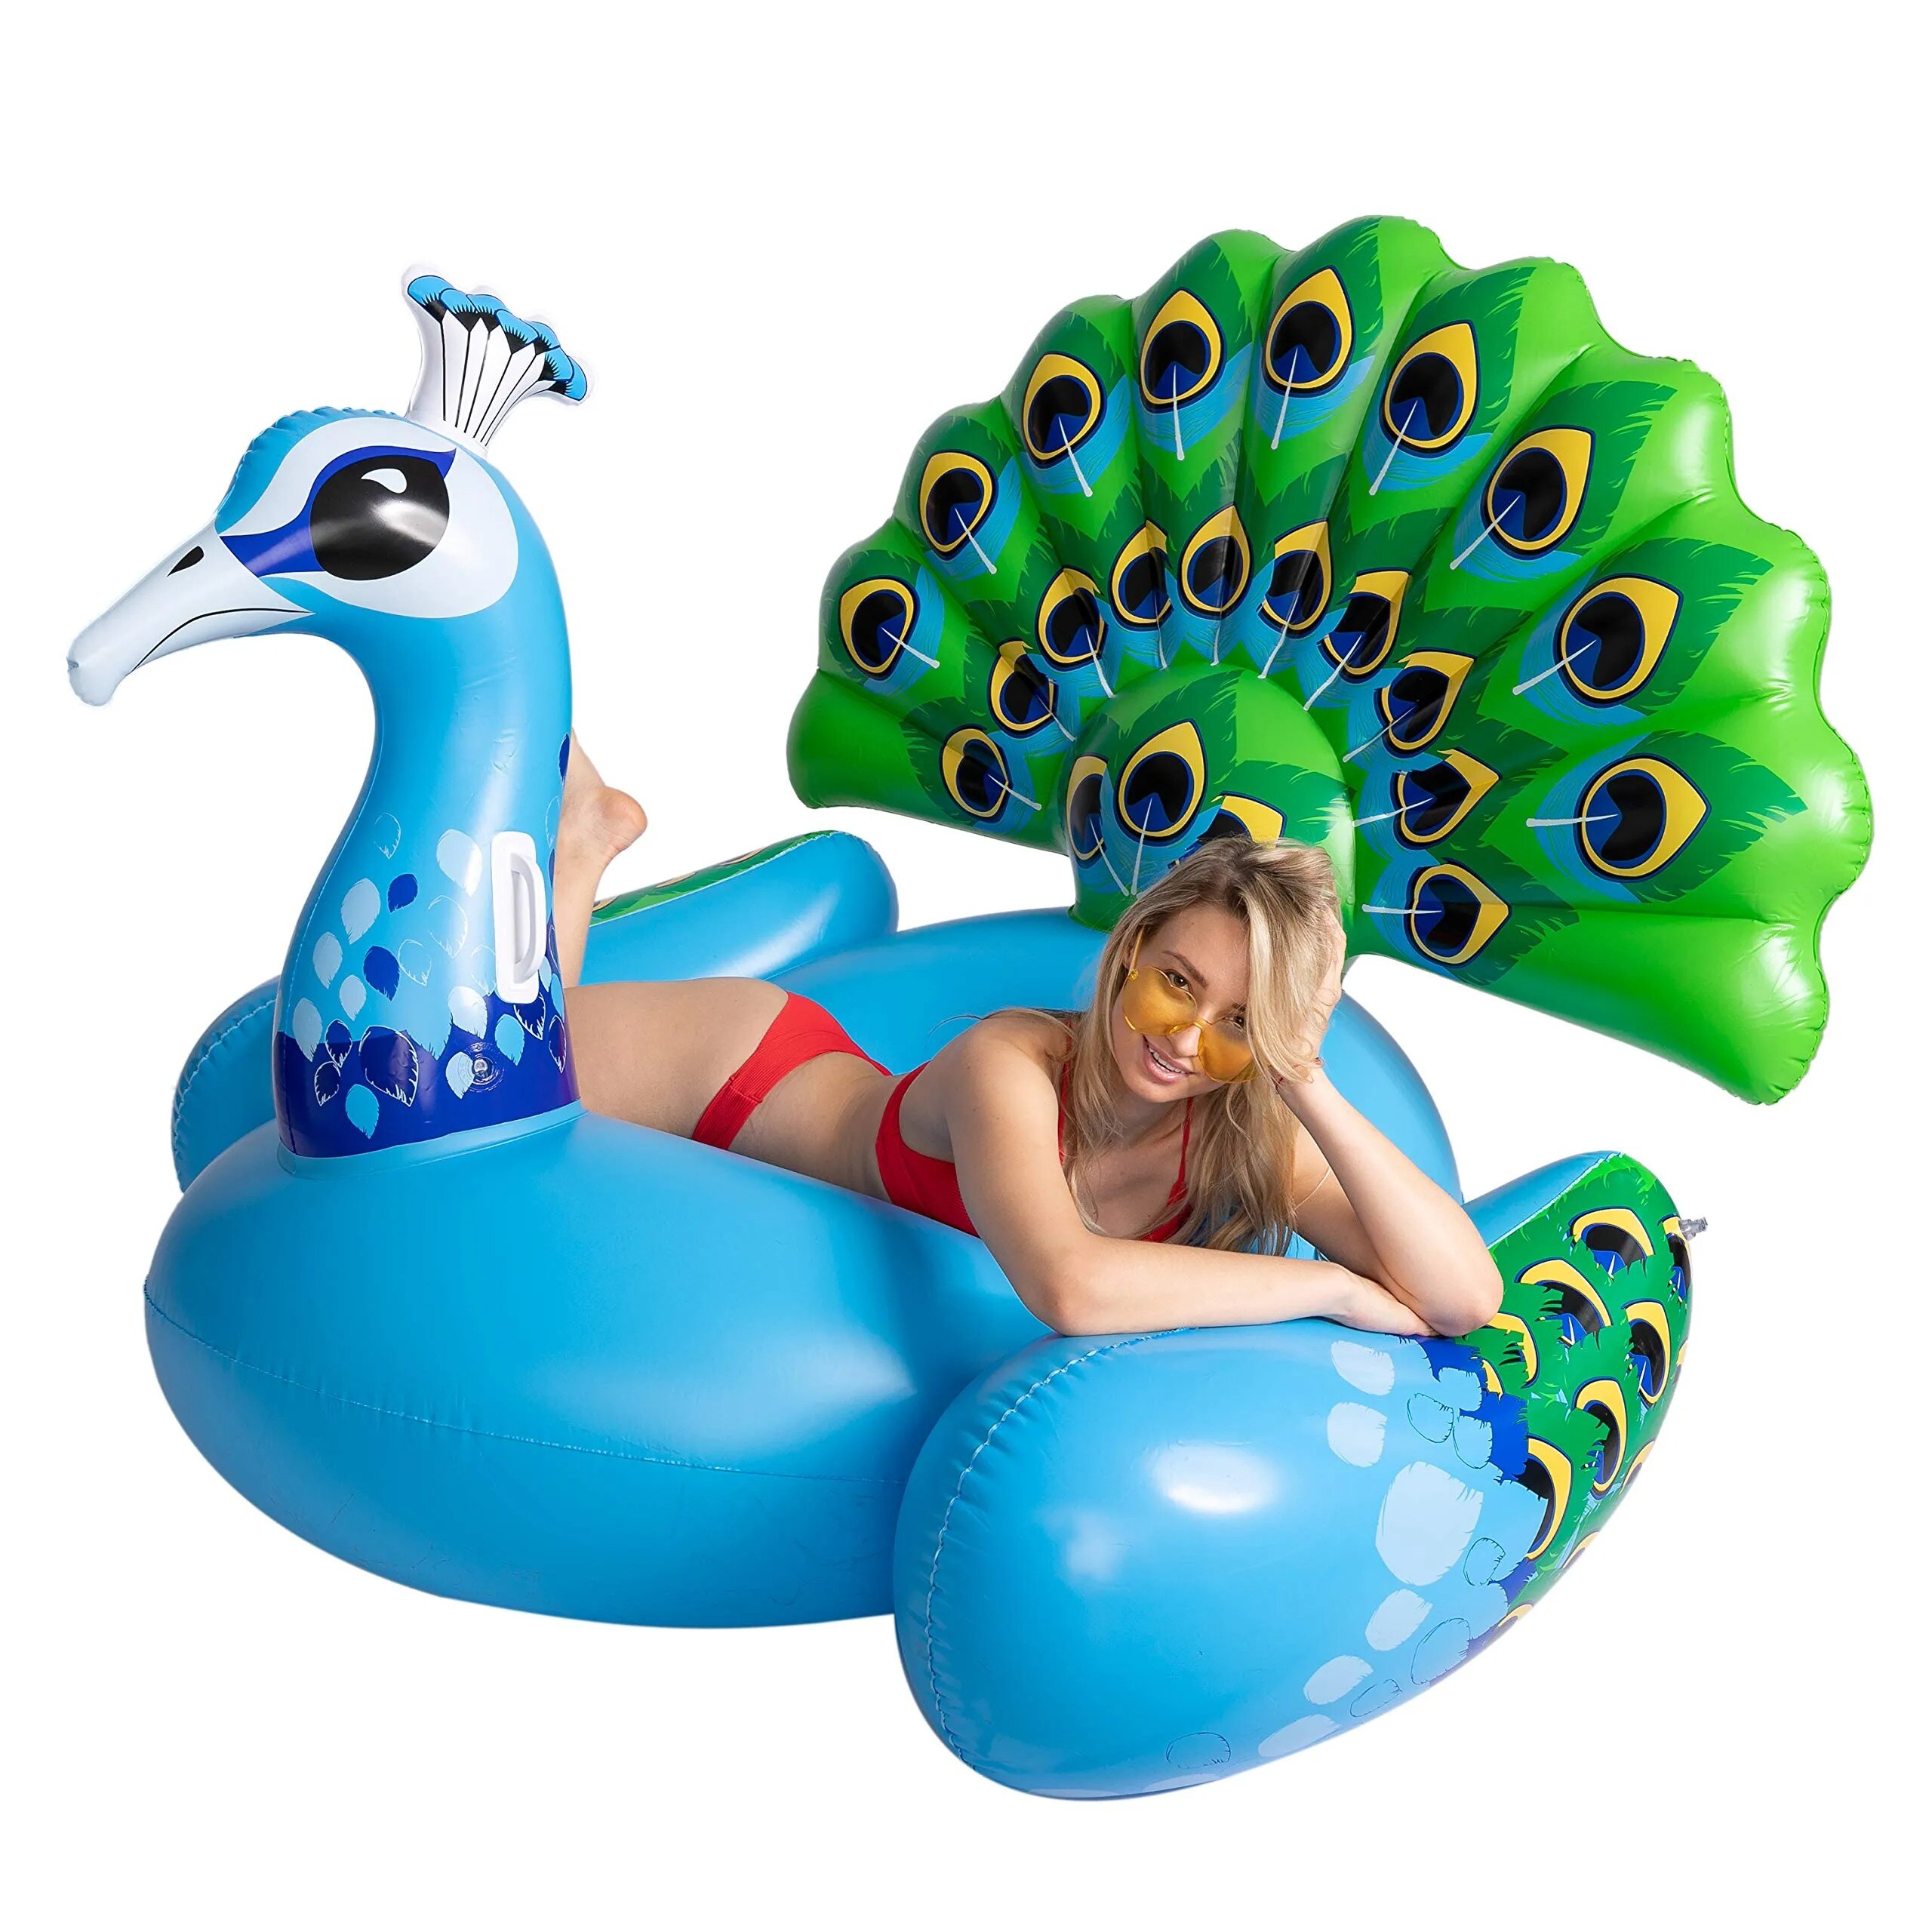 SYOURSELF Pool Floaties for Adults with Drink Holder,Thickened